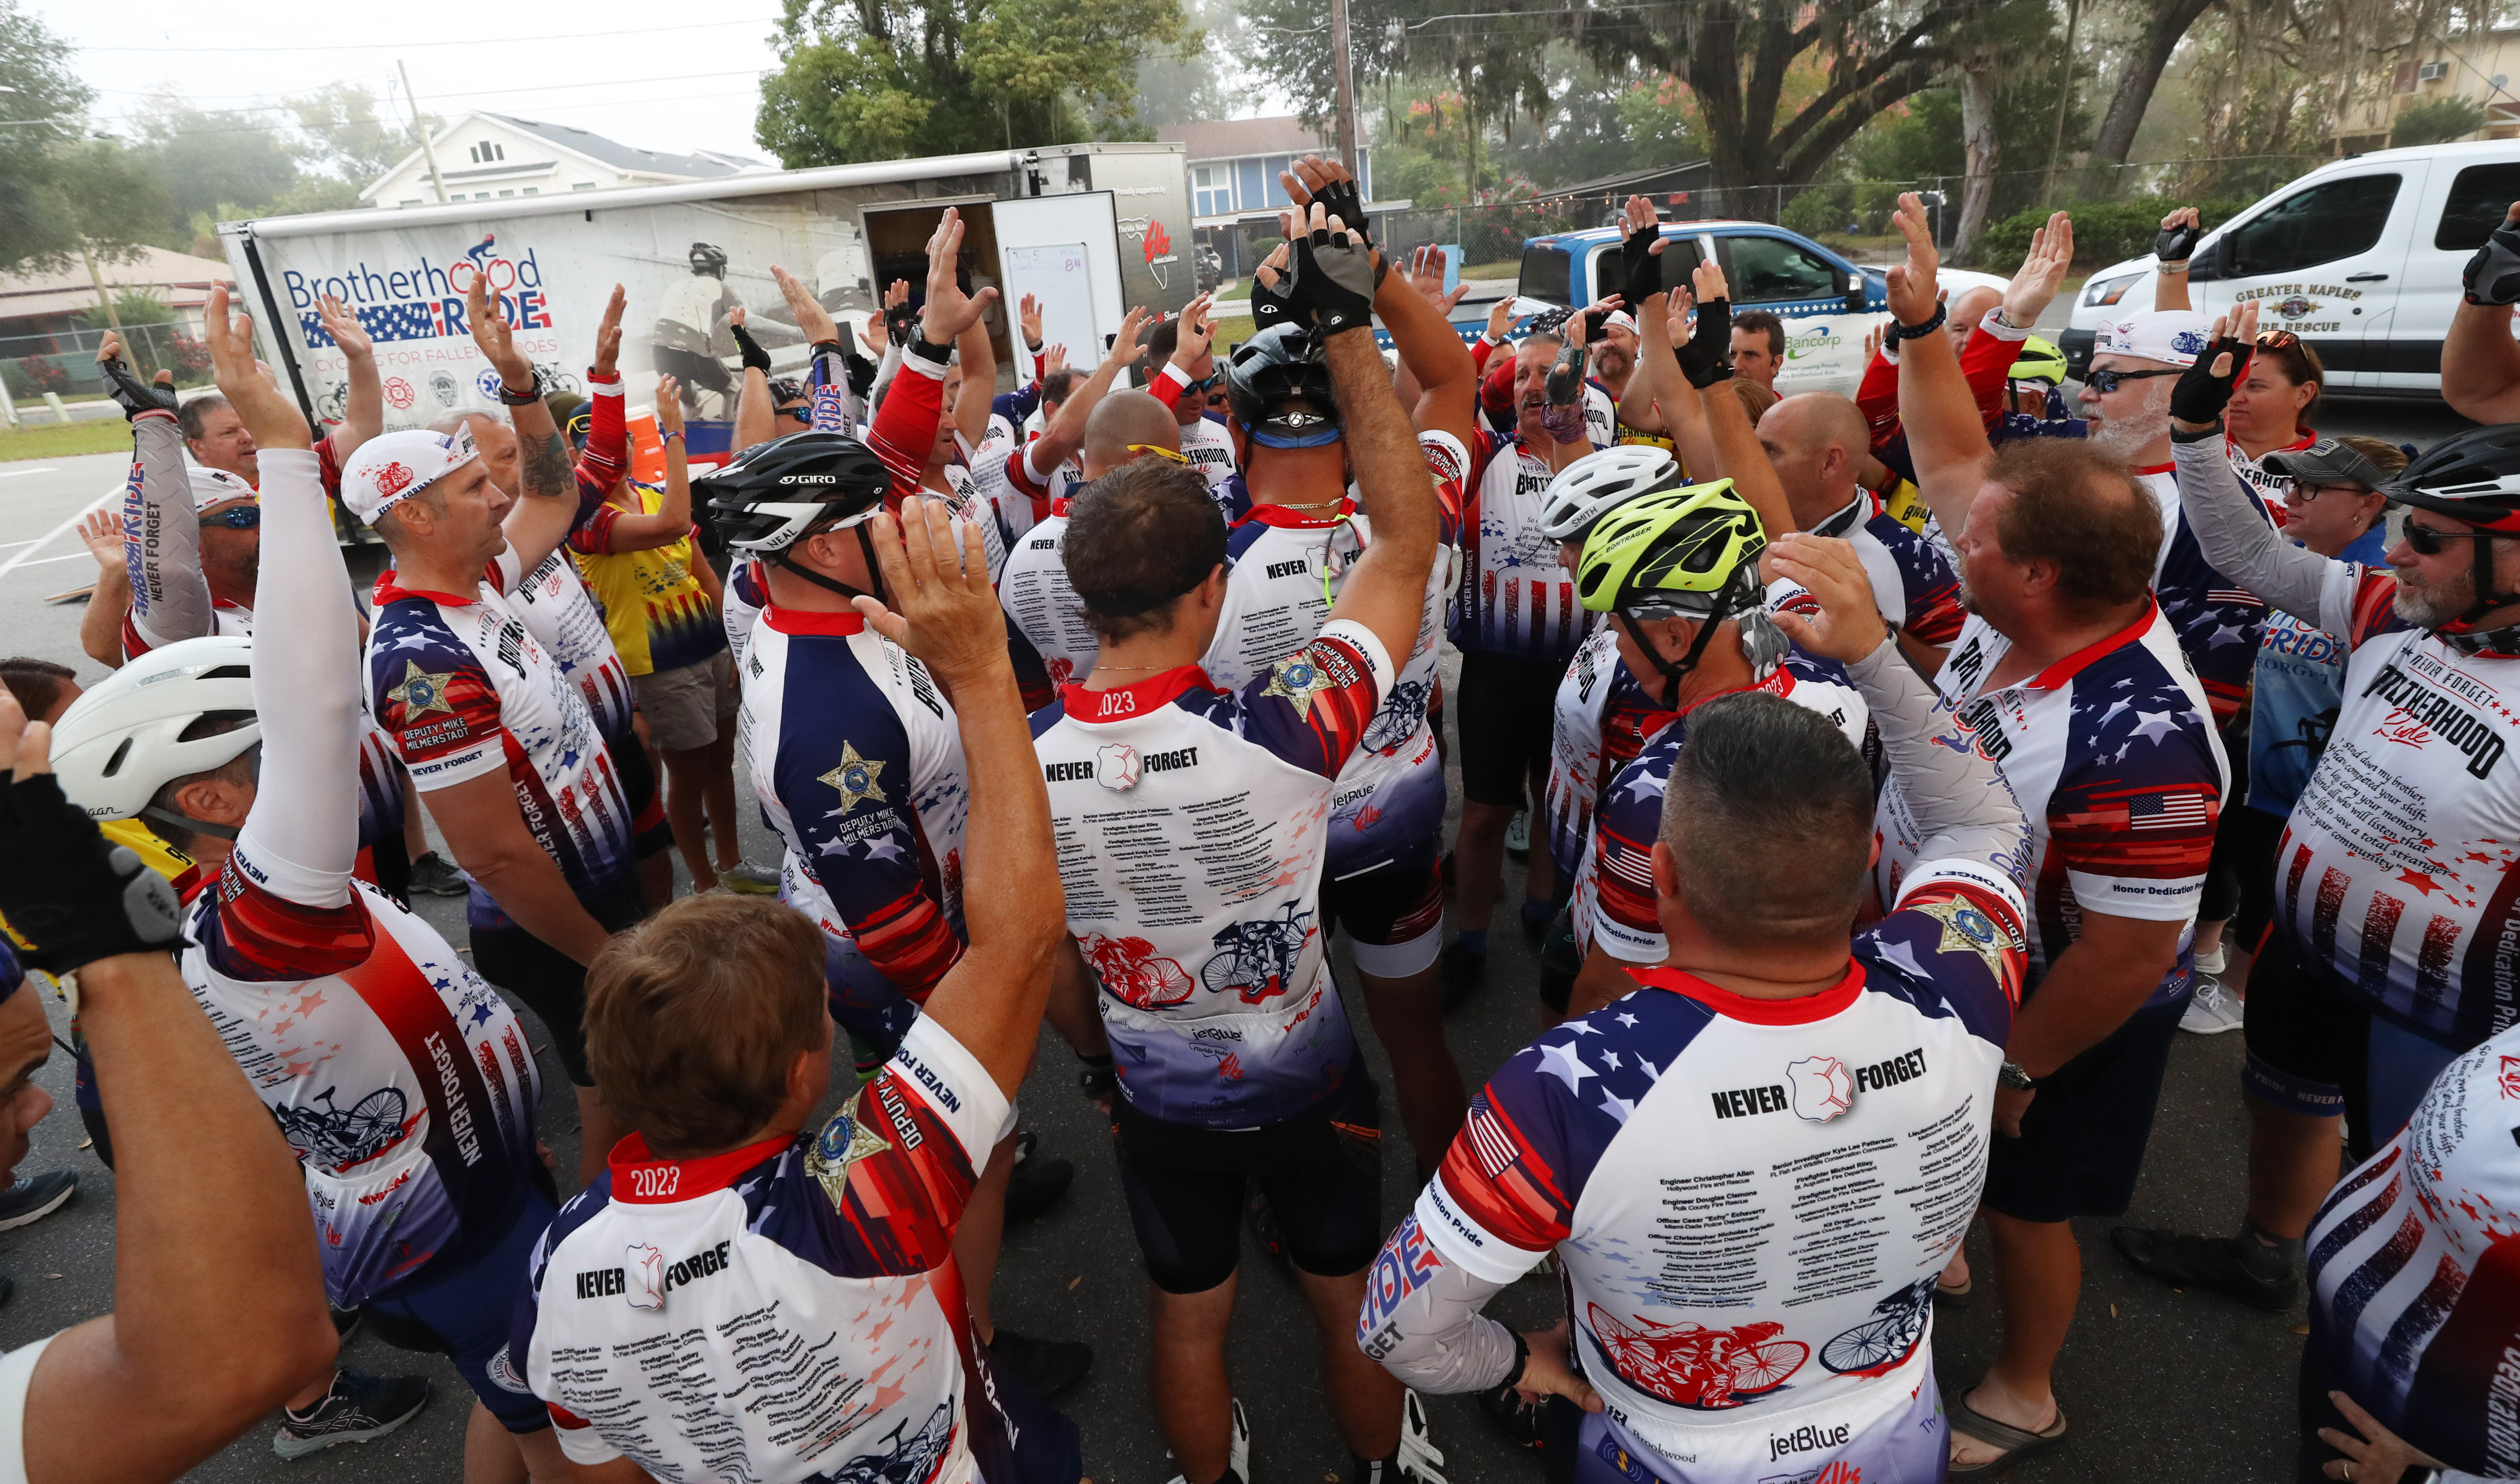 Cyclist participating in the Brotherhood Ride huddle before departing the Elks Lodge 1079, on their way to Cocoa Beach, on Tuesday, October 31, 2023. The ride is dedicated to the 28 Florida Fallen First Responders who died in the line of duty in 2022 while protecting their communities. They started in Naples and will end their 9-day ride through Florida in Miami.(Ricardo Ramirez Buxeda/ Orlando Sentinel)